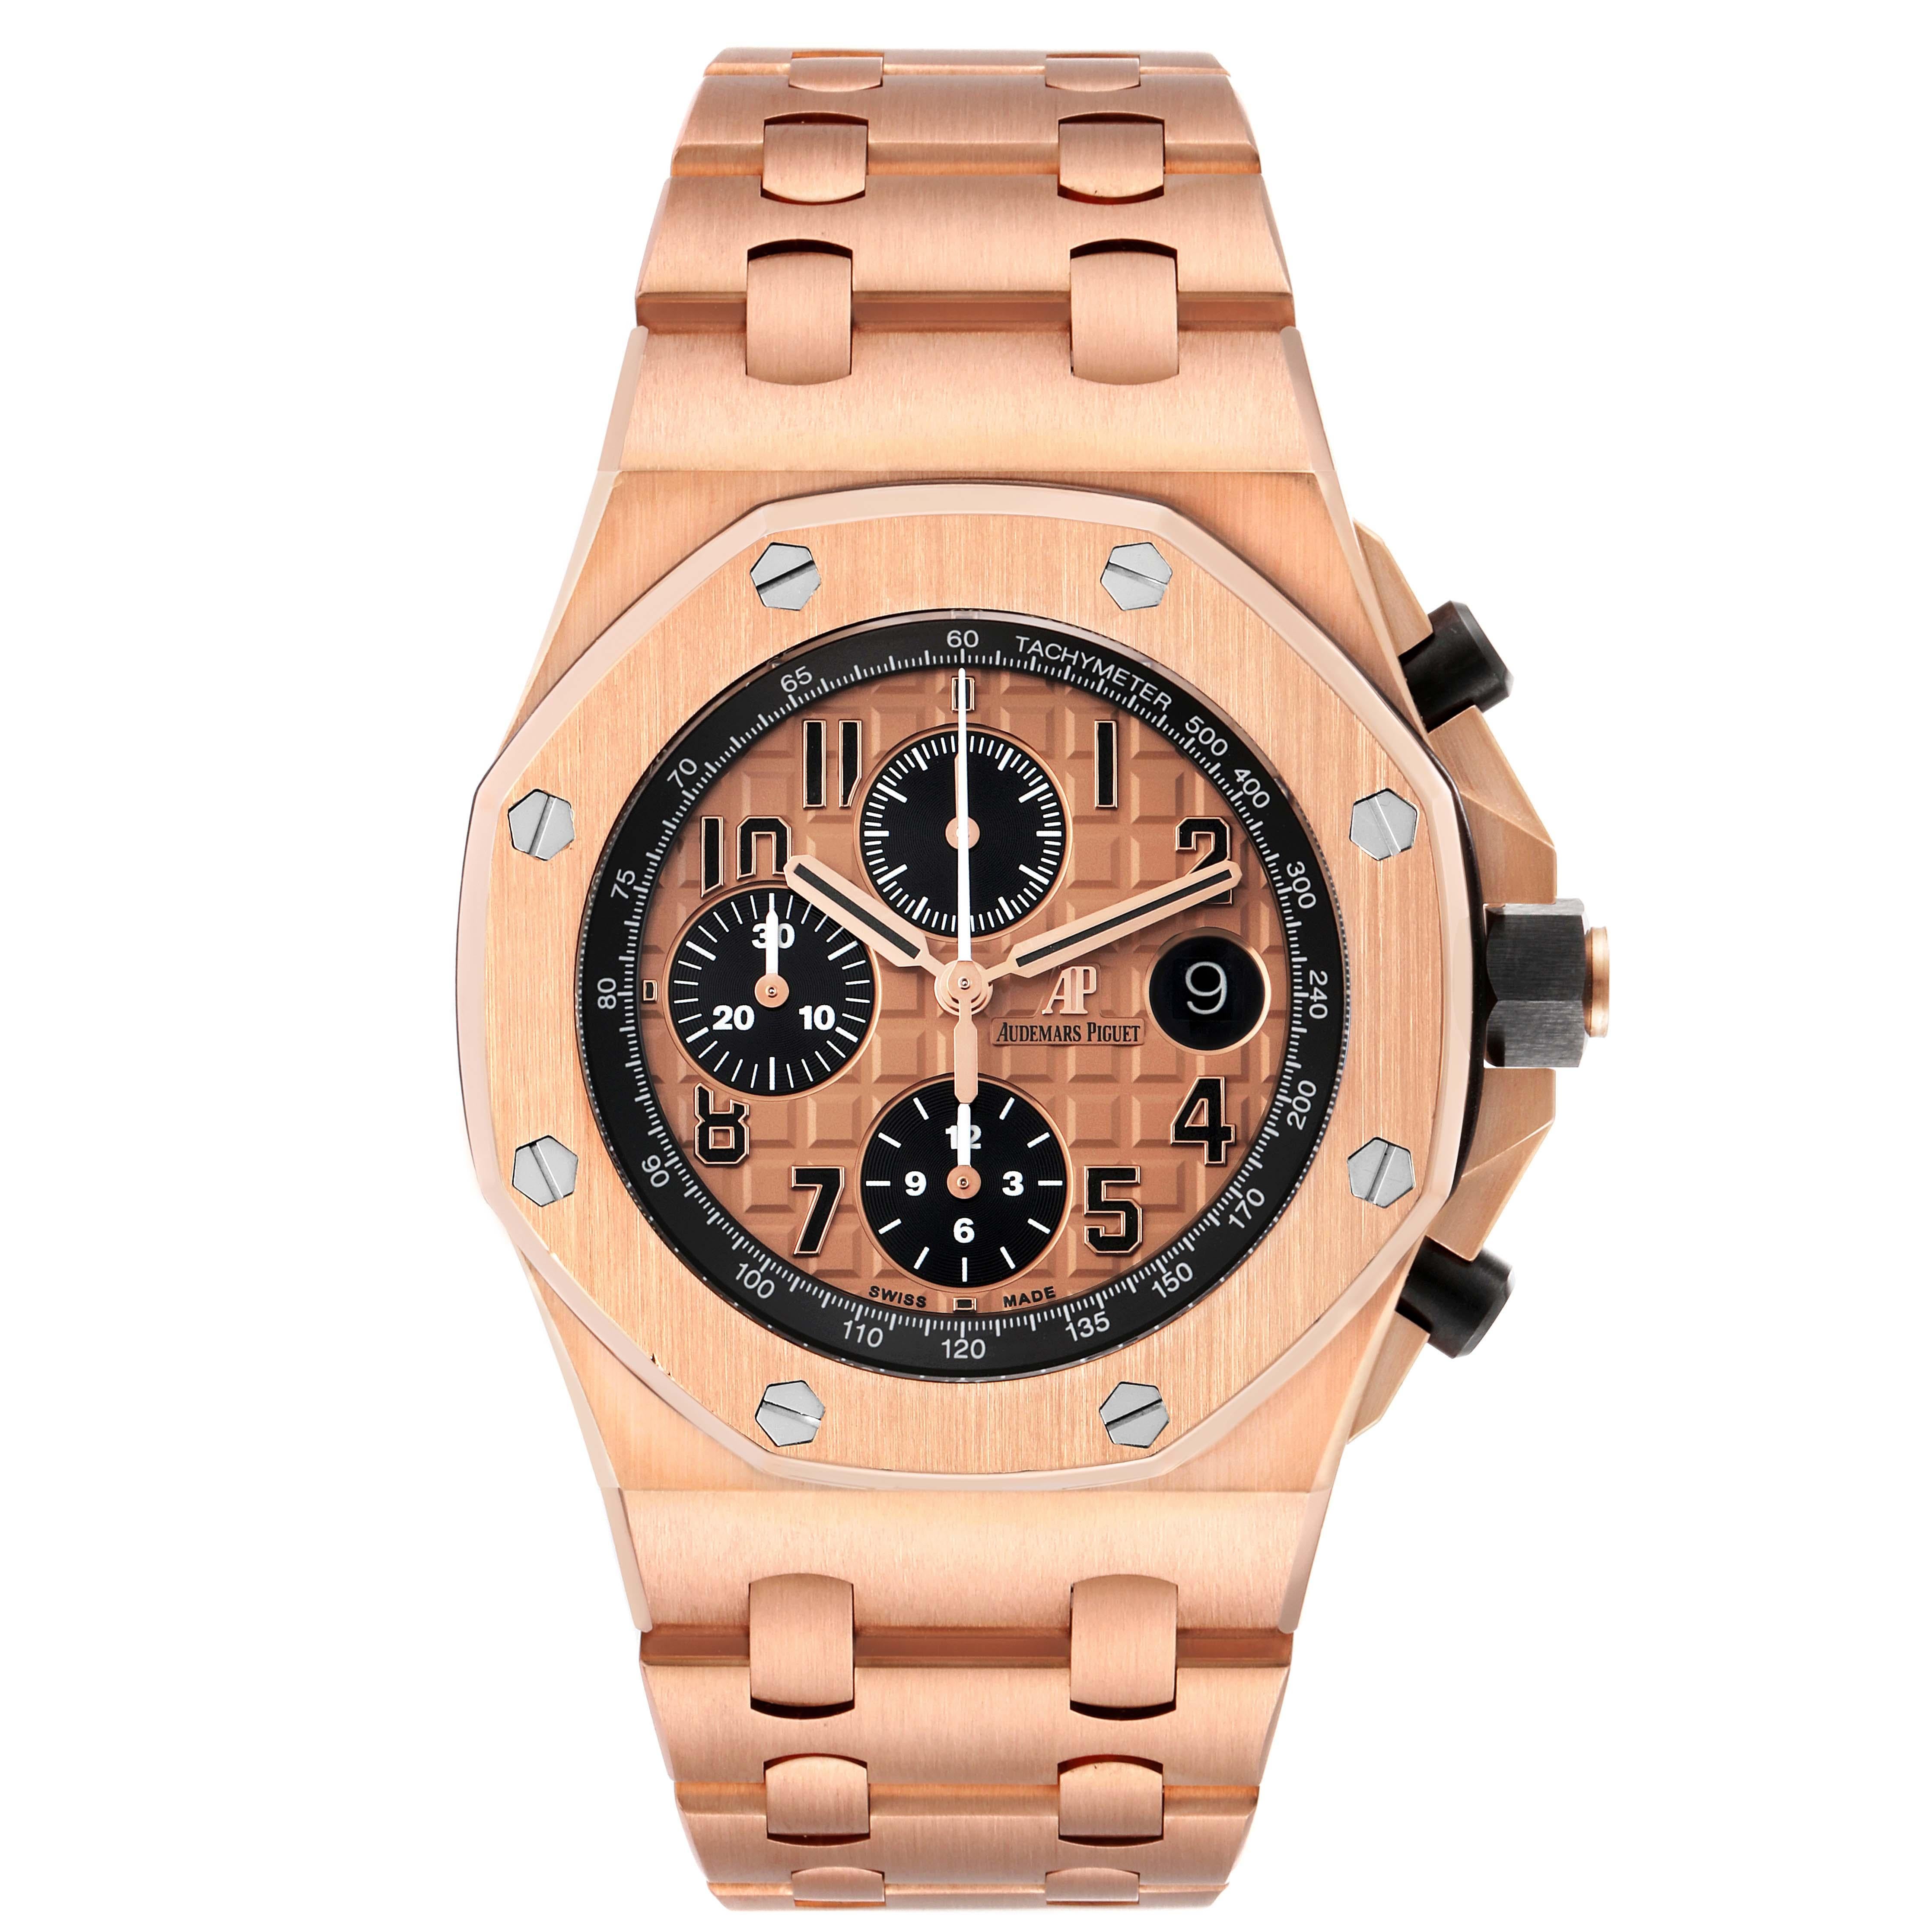 Audemars Piguet Royal Oak Offshore in Rose Gold. 

Comes with Box and Papers

Used watch. 